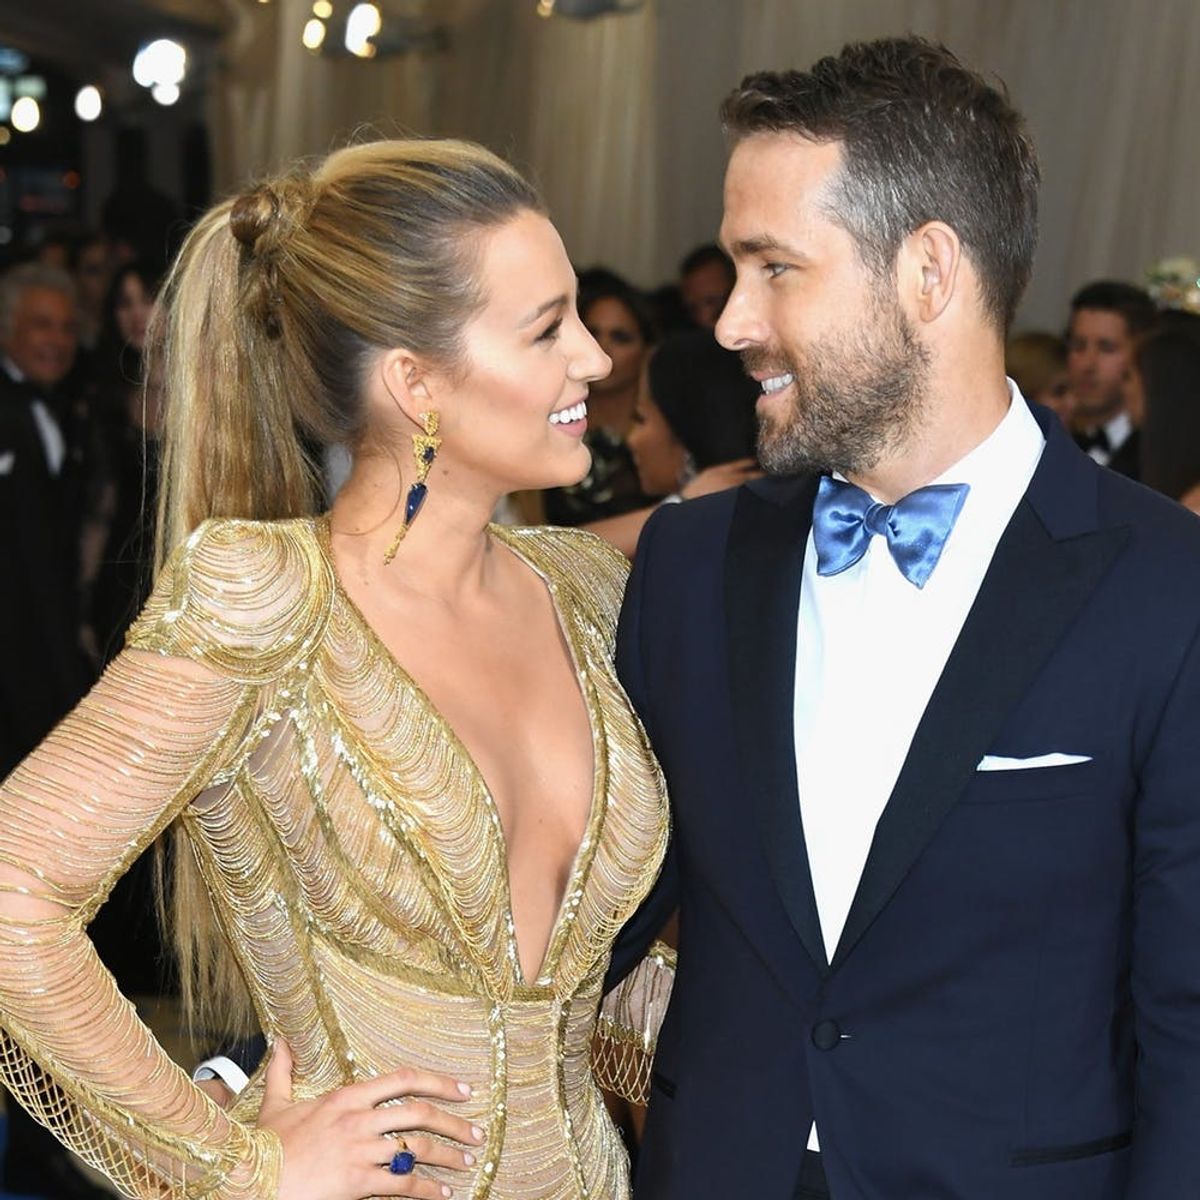 Blake Lively Might Not Be Thrilled With the Pic Ryan Reynolds Just Shared